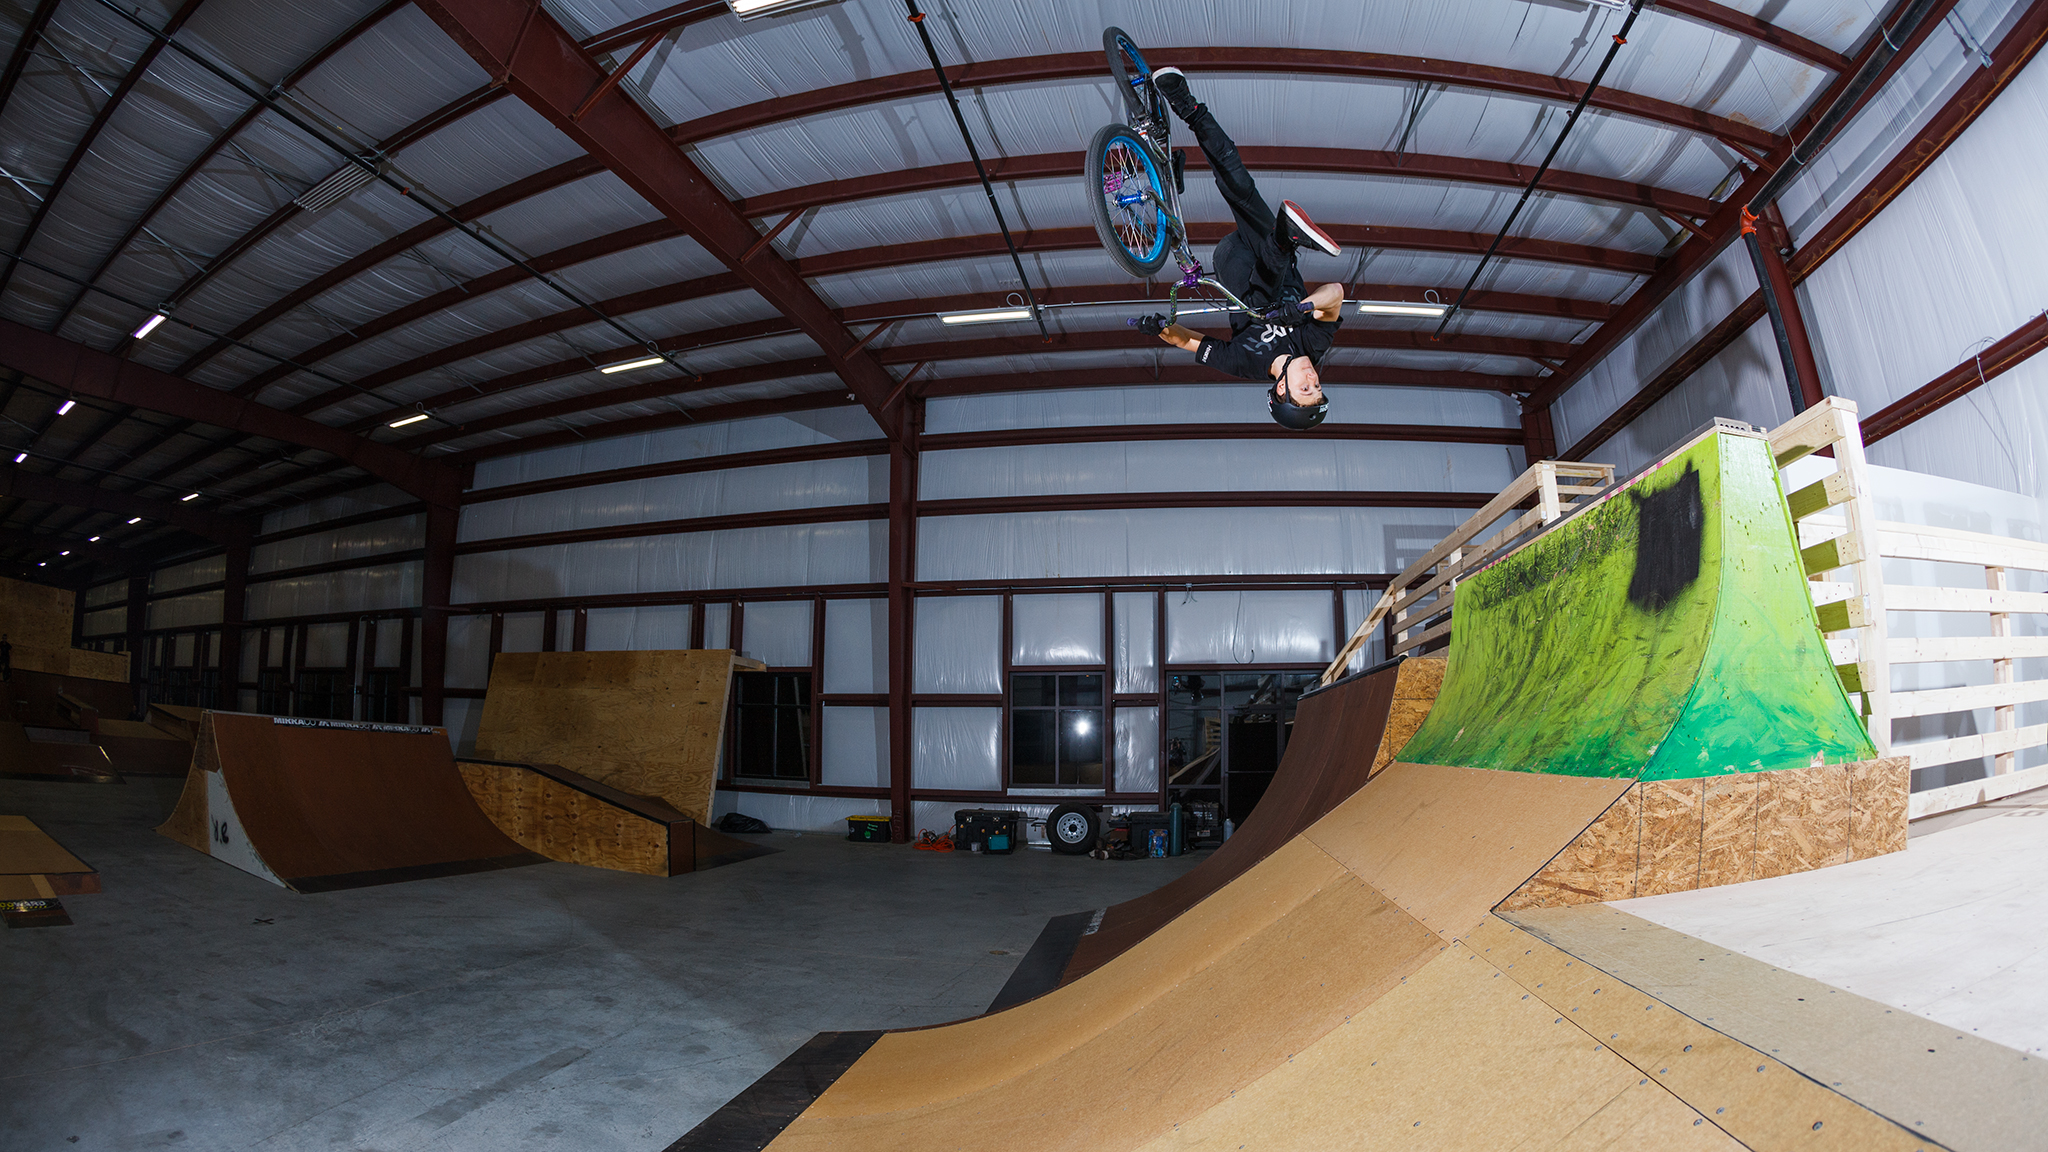 Gallery Daniel Dhers Action Sports Complex In N C X Games